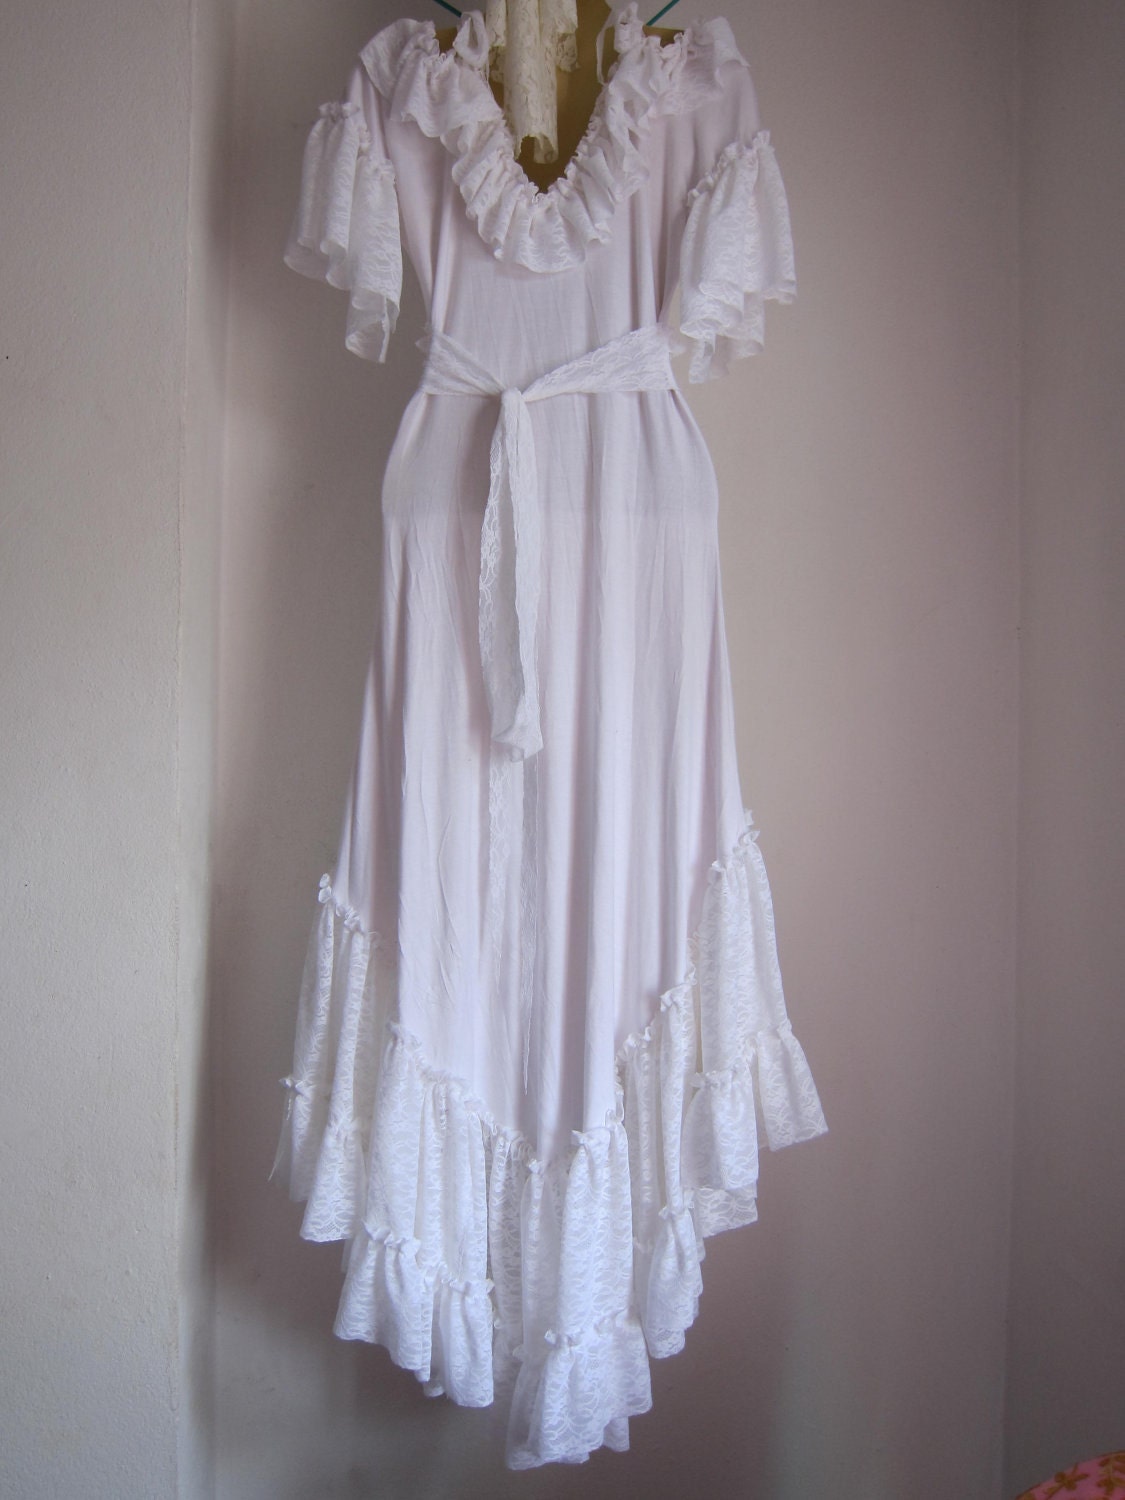 white bohemian gypsy dress with ruffles of lace/roses and